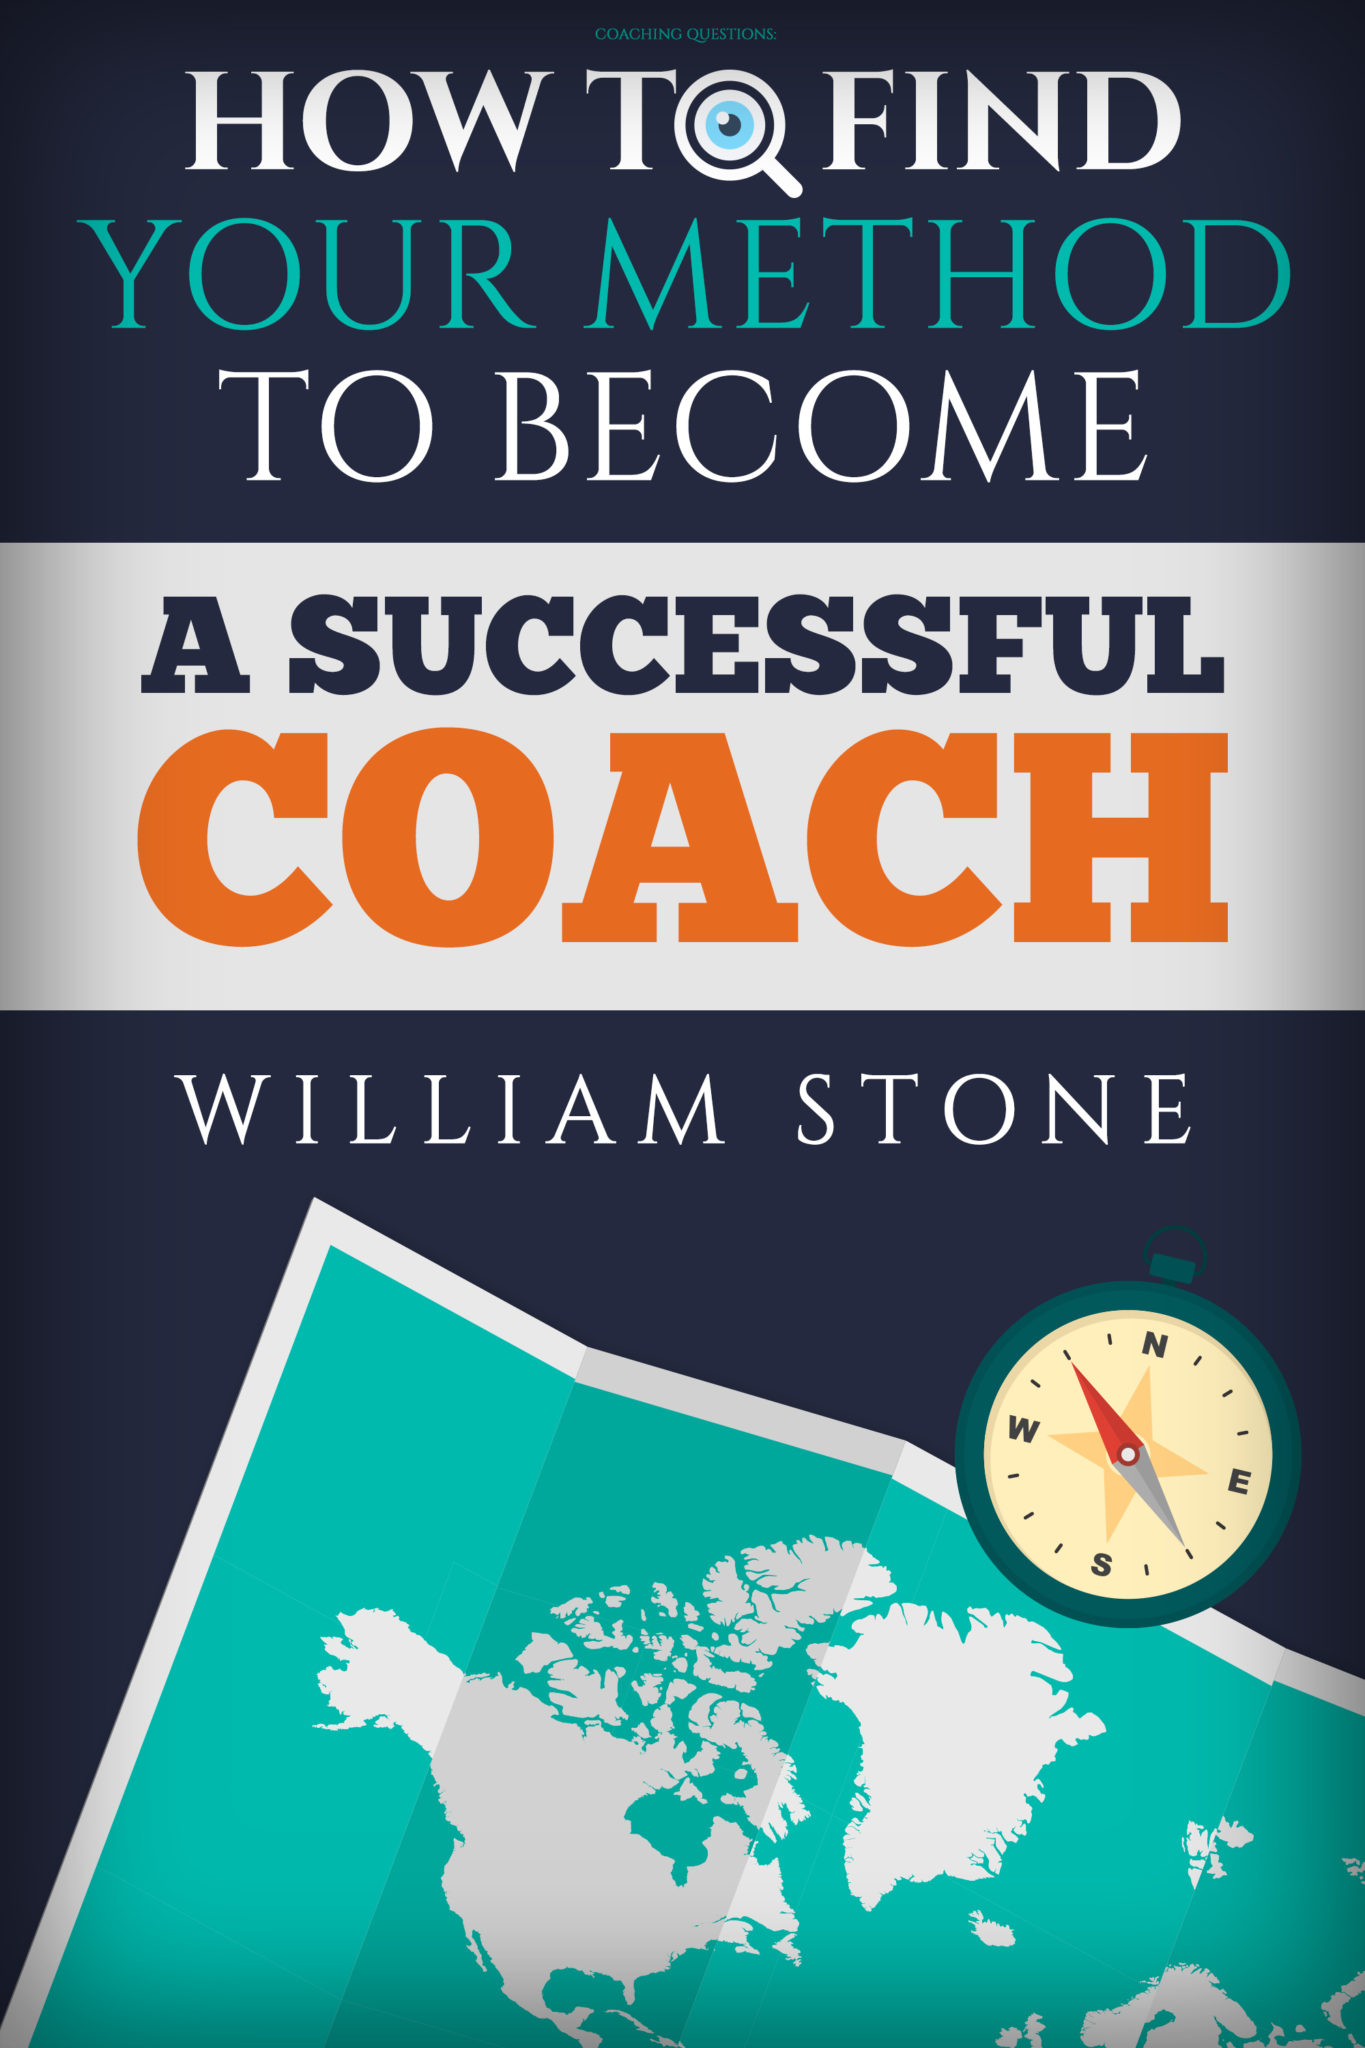 FREE: Coaching Questions: How to Find Your Method to Become a Successful Coach by William Stone